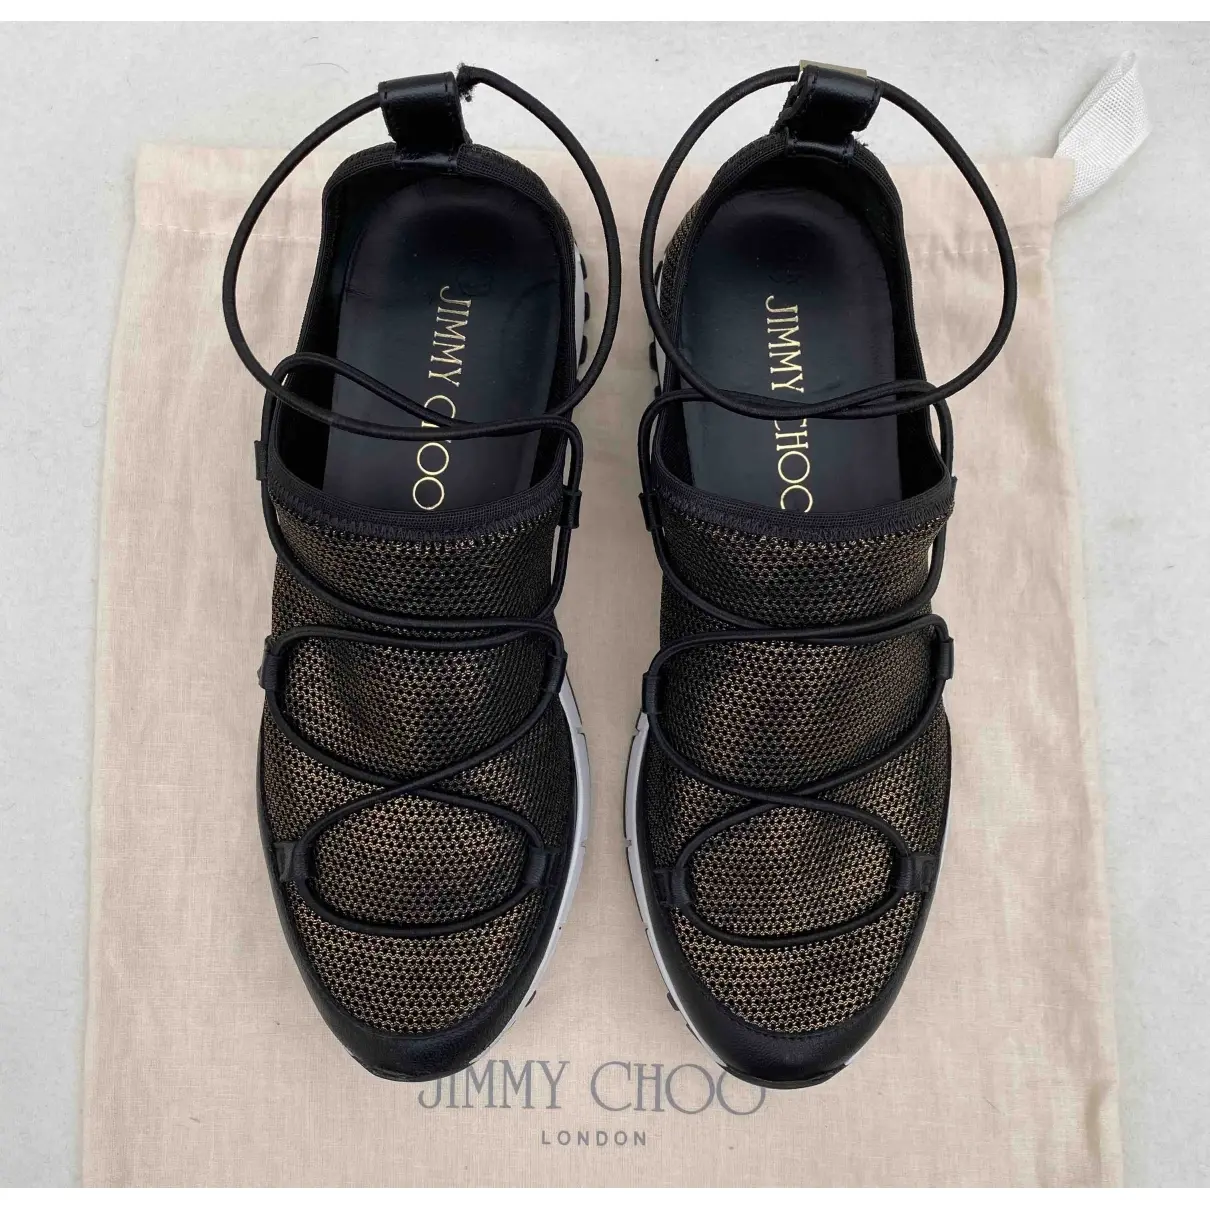 Jimmy Choo Cloth trainers for sale